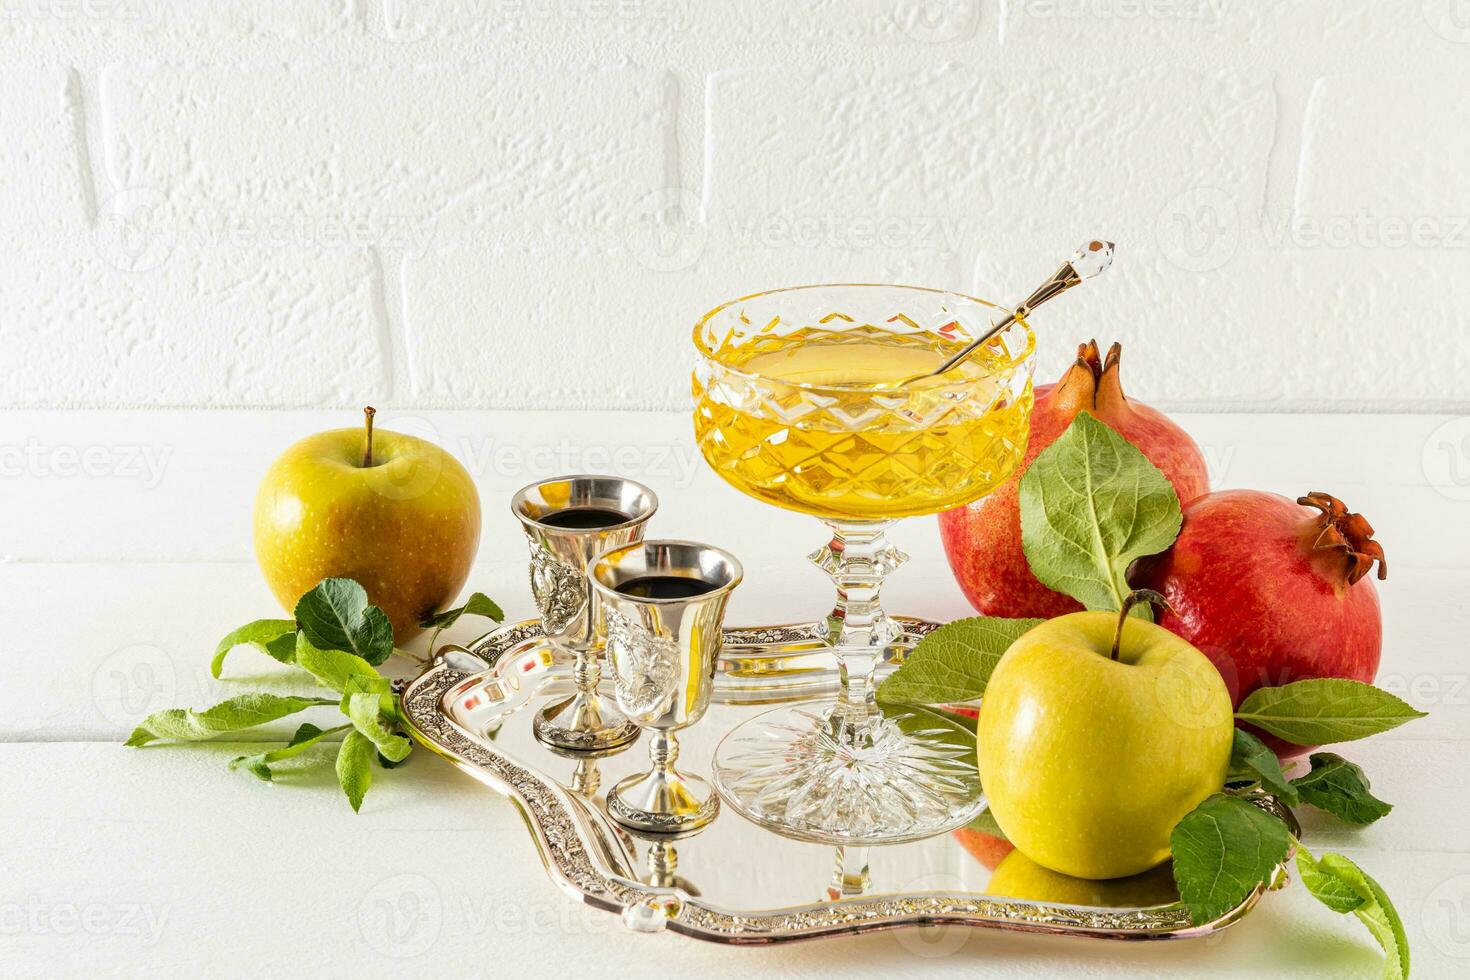 Beautiful still life with ripe pomegranates and apples, a silver glass of wine and a bowl of honey. White background. The concept of Rosh Hashanah. photo